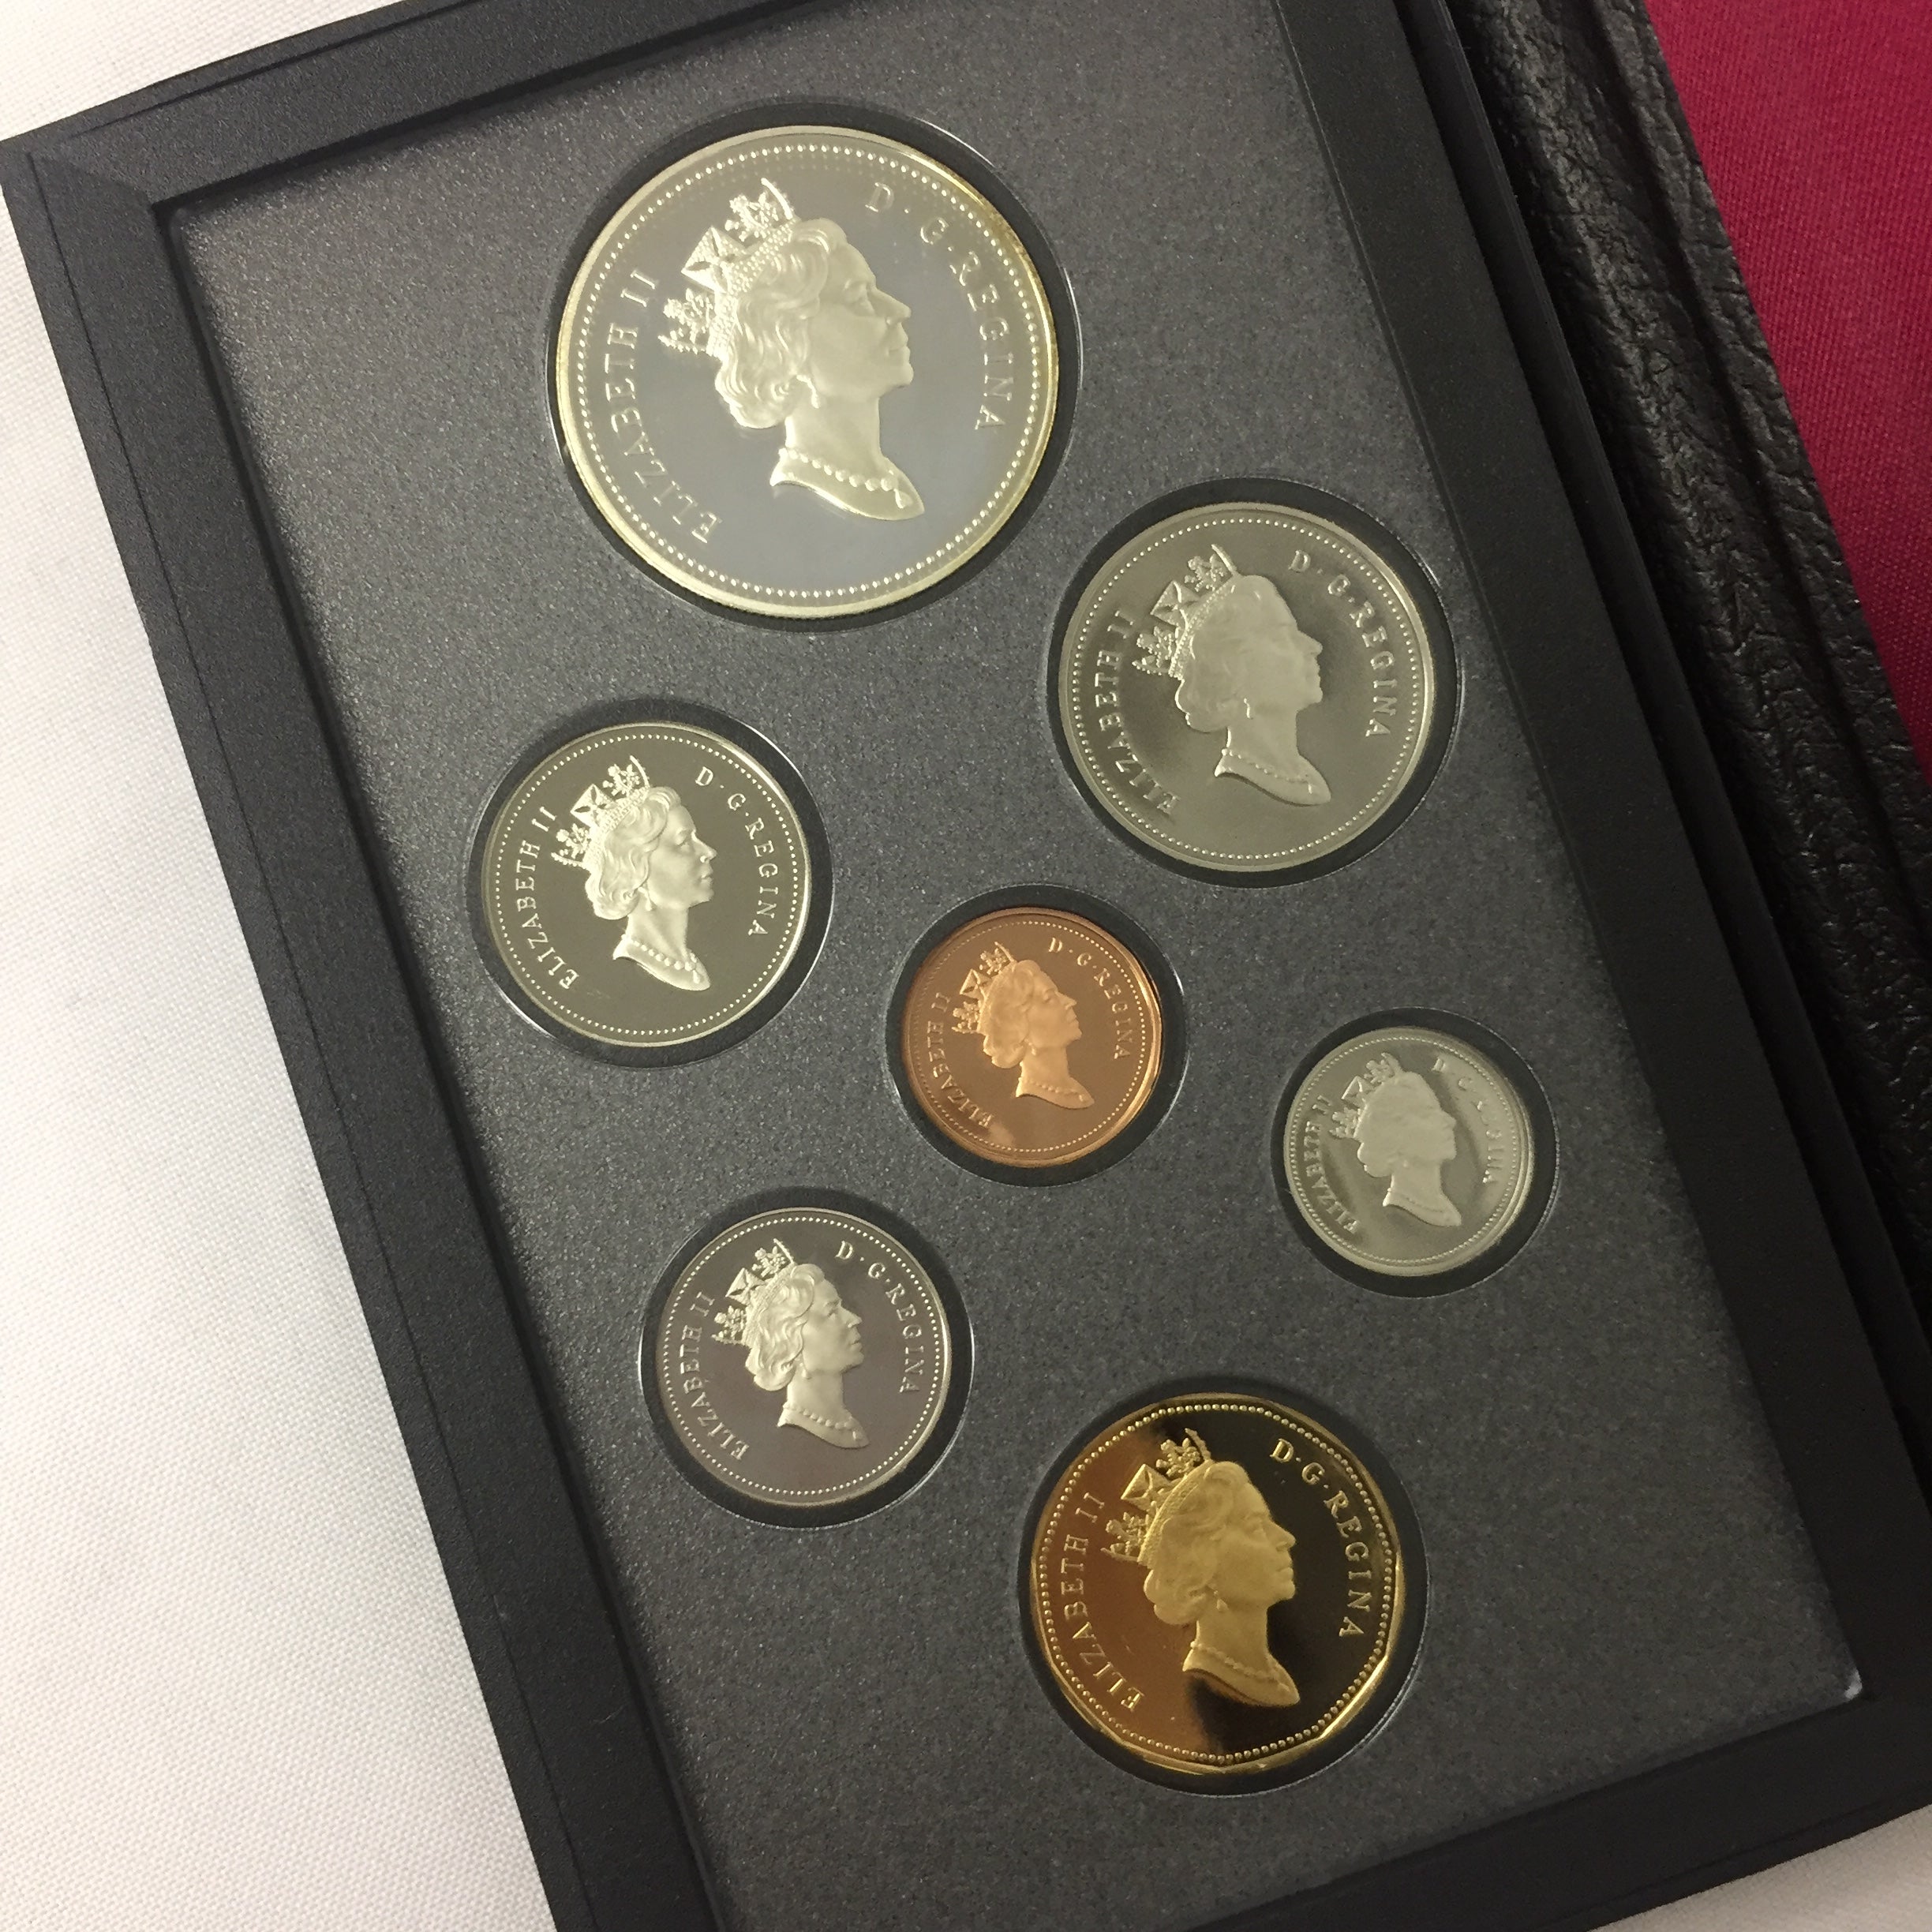 1993 Proof Coin Set of the Stanley Cup's 100th Anniversary